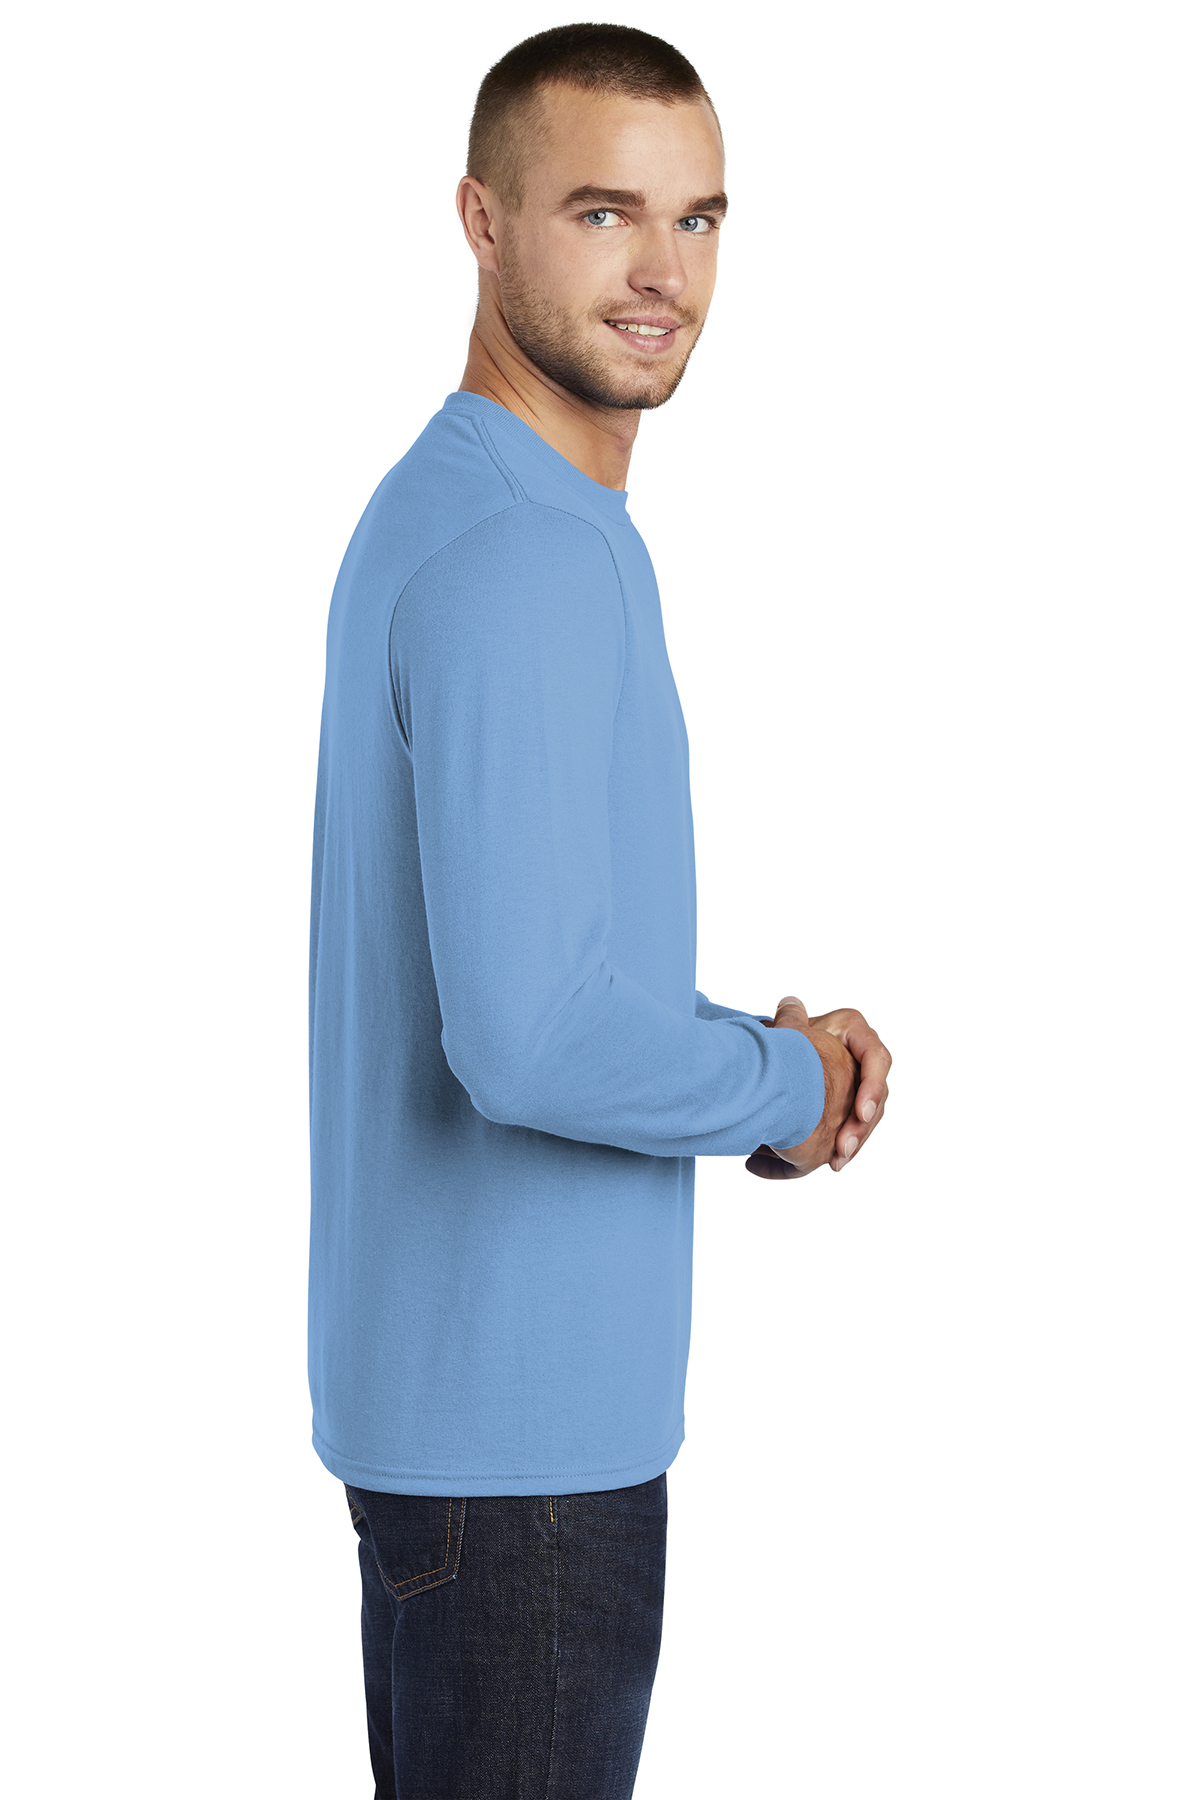 Port & Company Long Sleeve Core Blend Tee | Product | Company Casuals